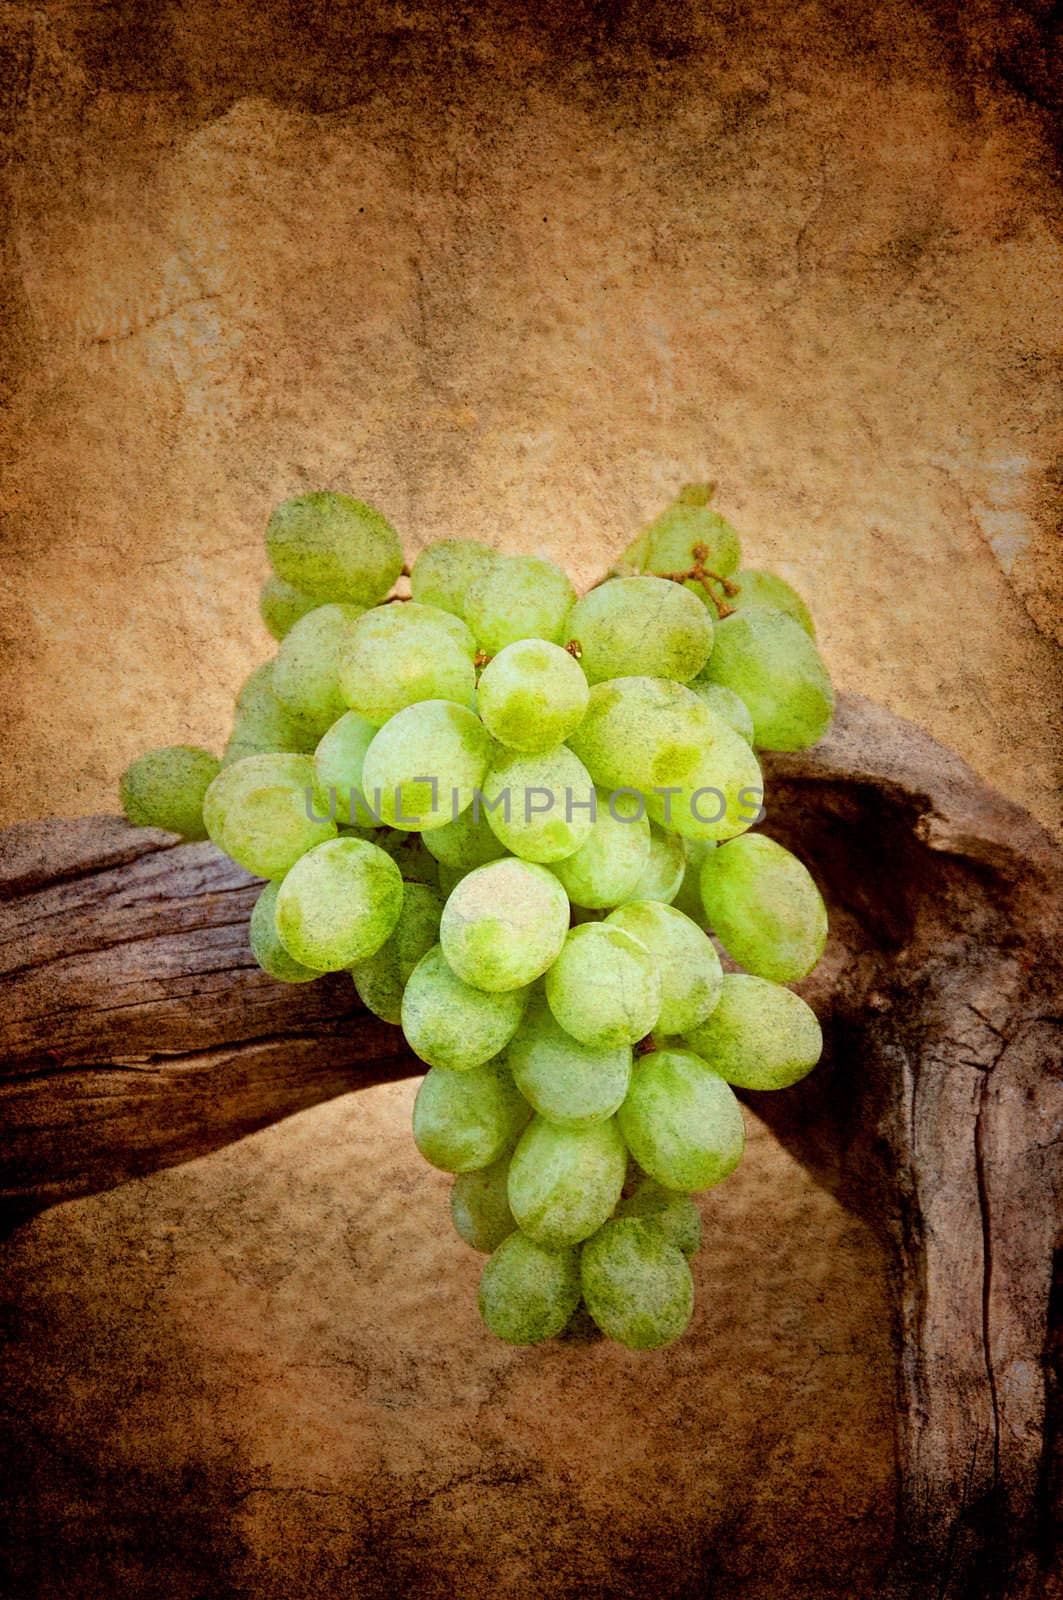 Green grapes on driftwood in grunge.